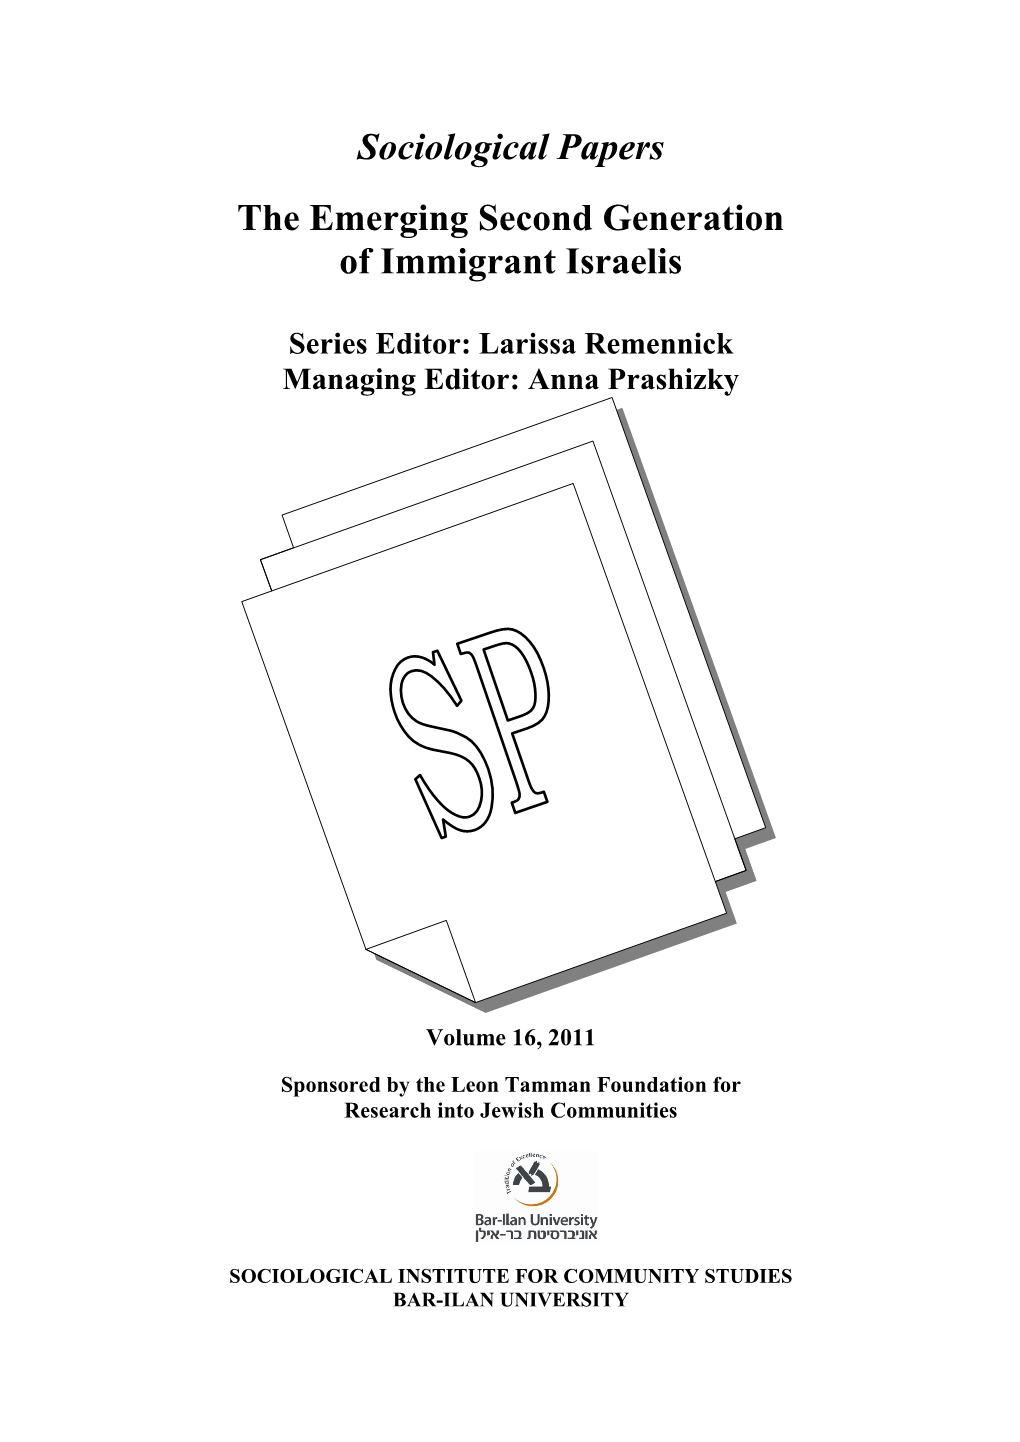 Sociological Papers the Emerging Second Generation of Immigrant